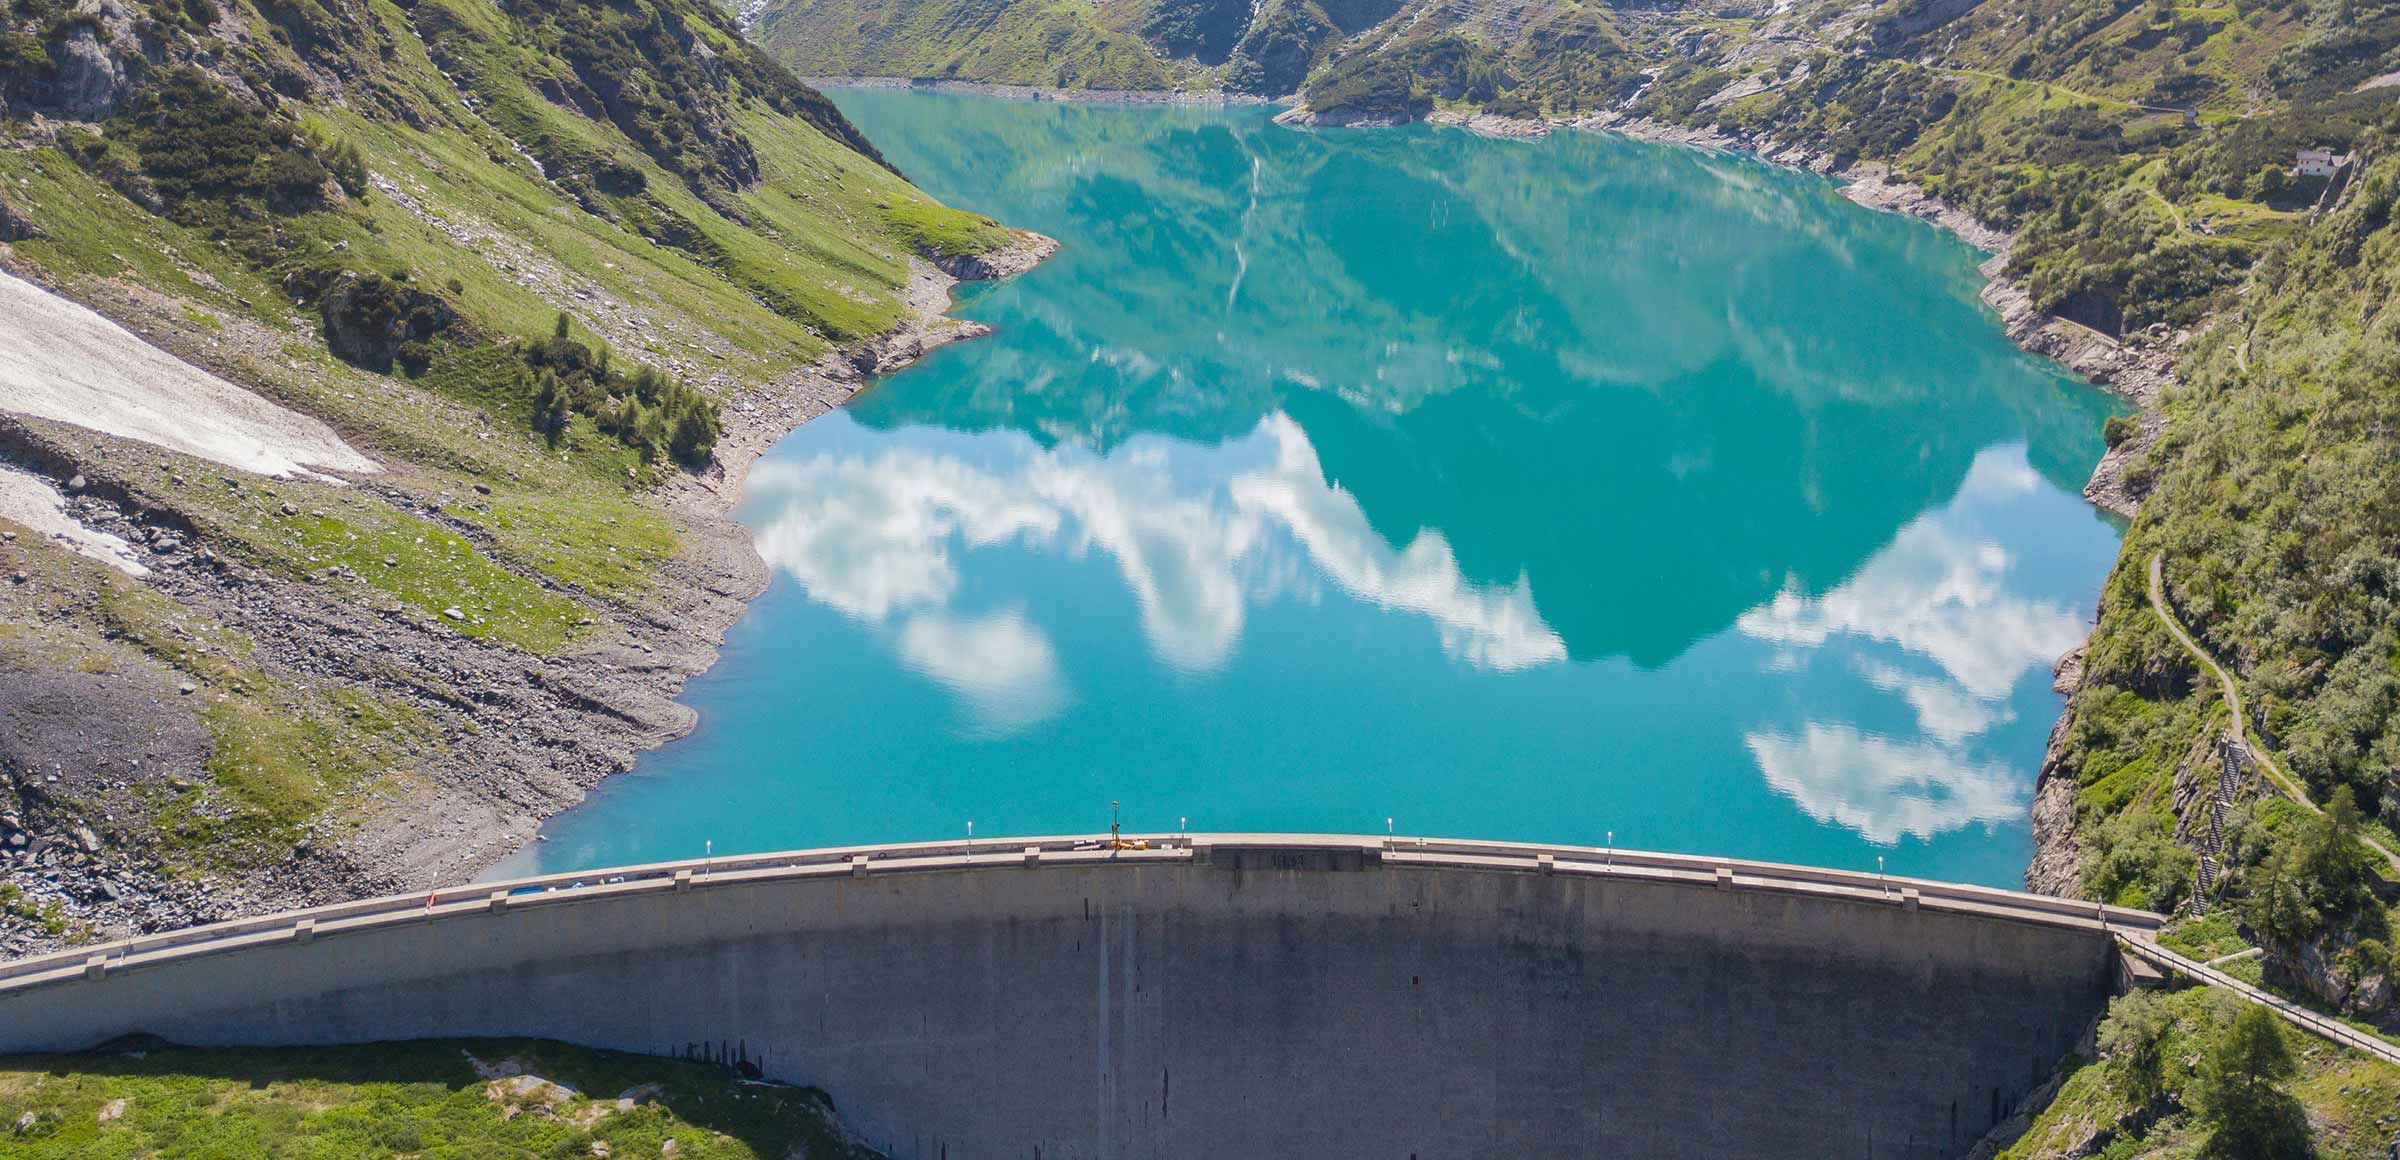 A dam forms an artificial lake in the mountains.